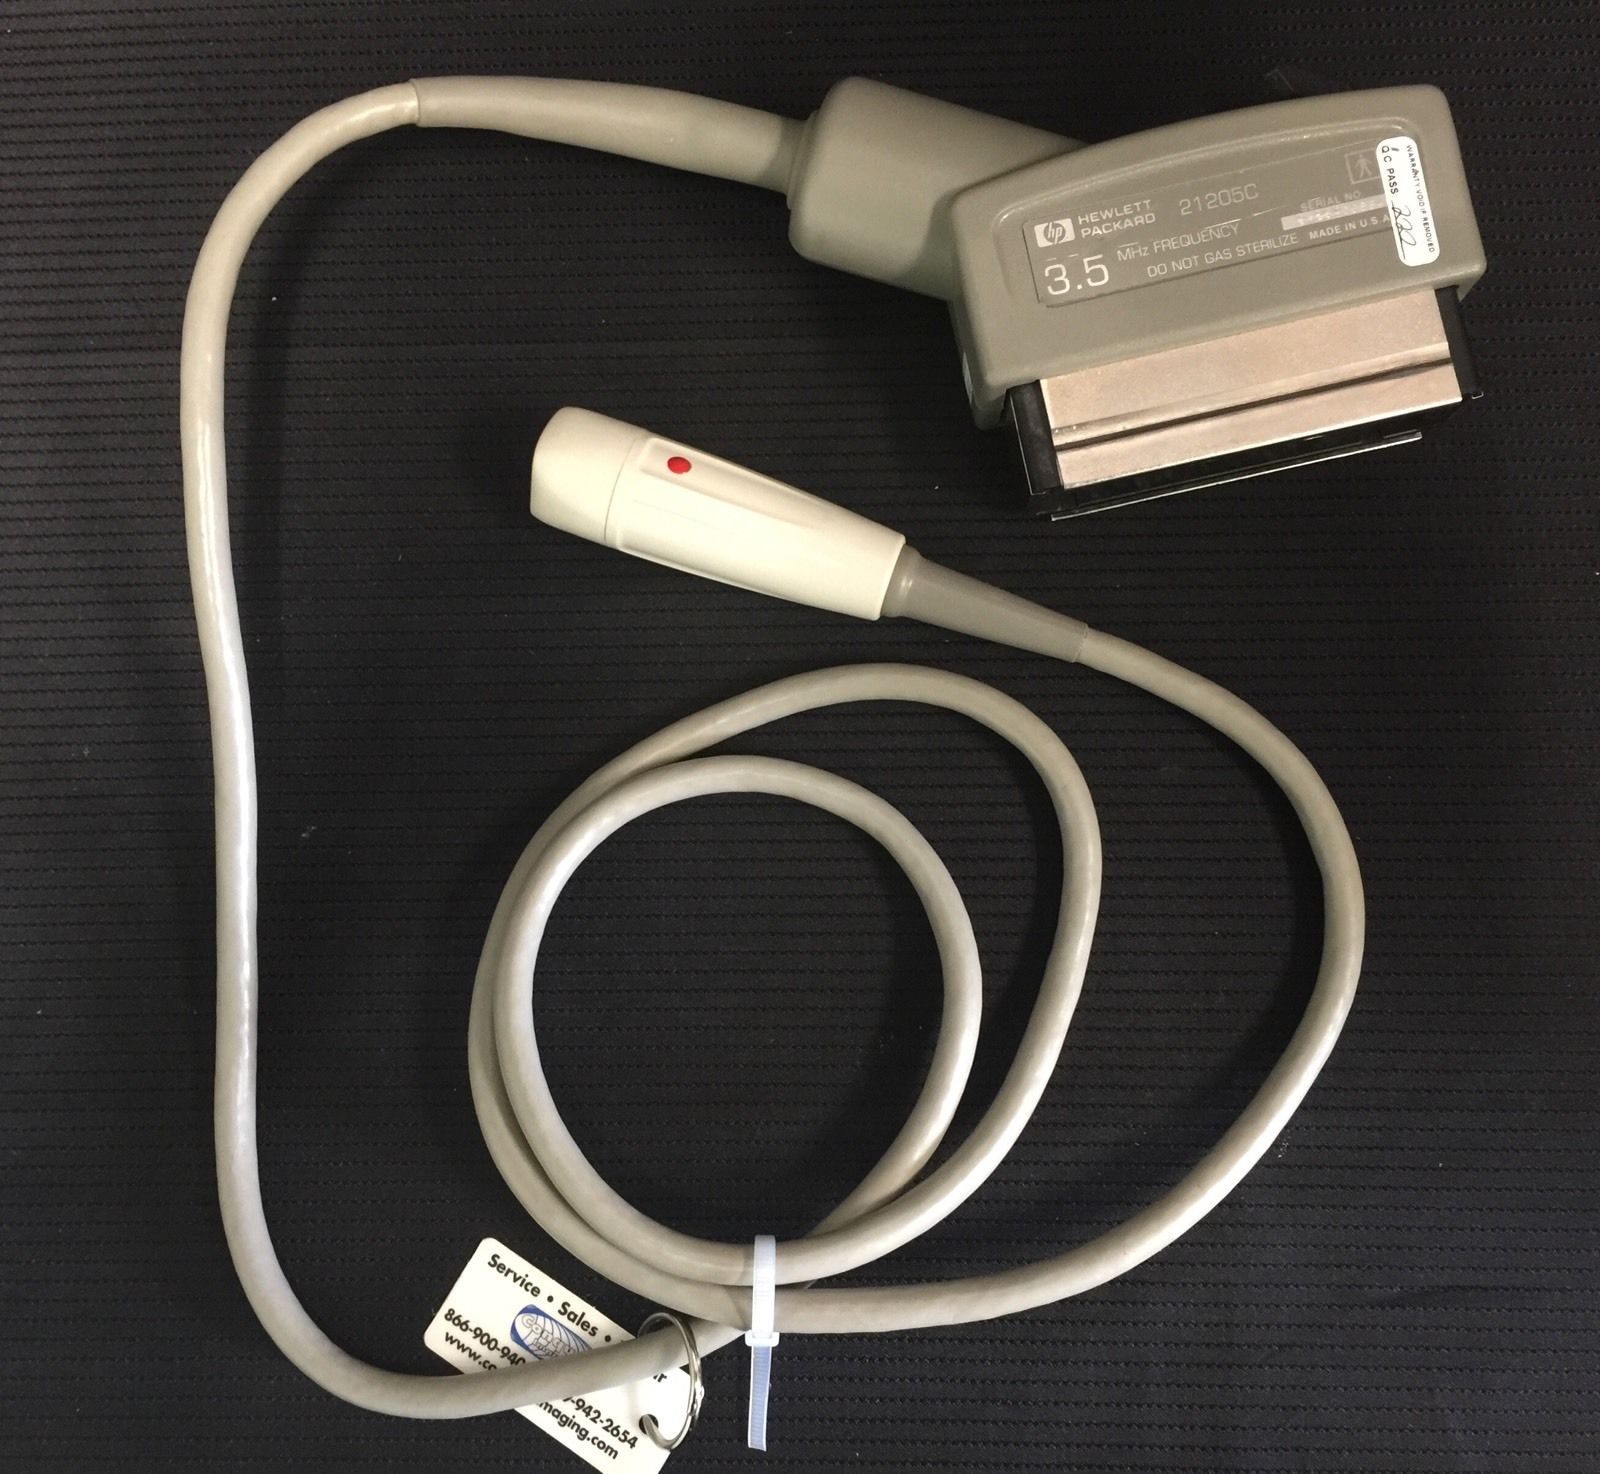 HP 21205C Phased Array 3.5 MHz Frequency Cardic Ultrasound Sector Transducer